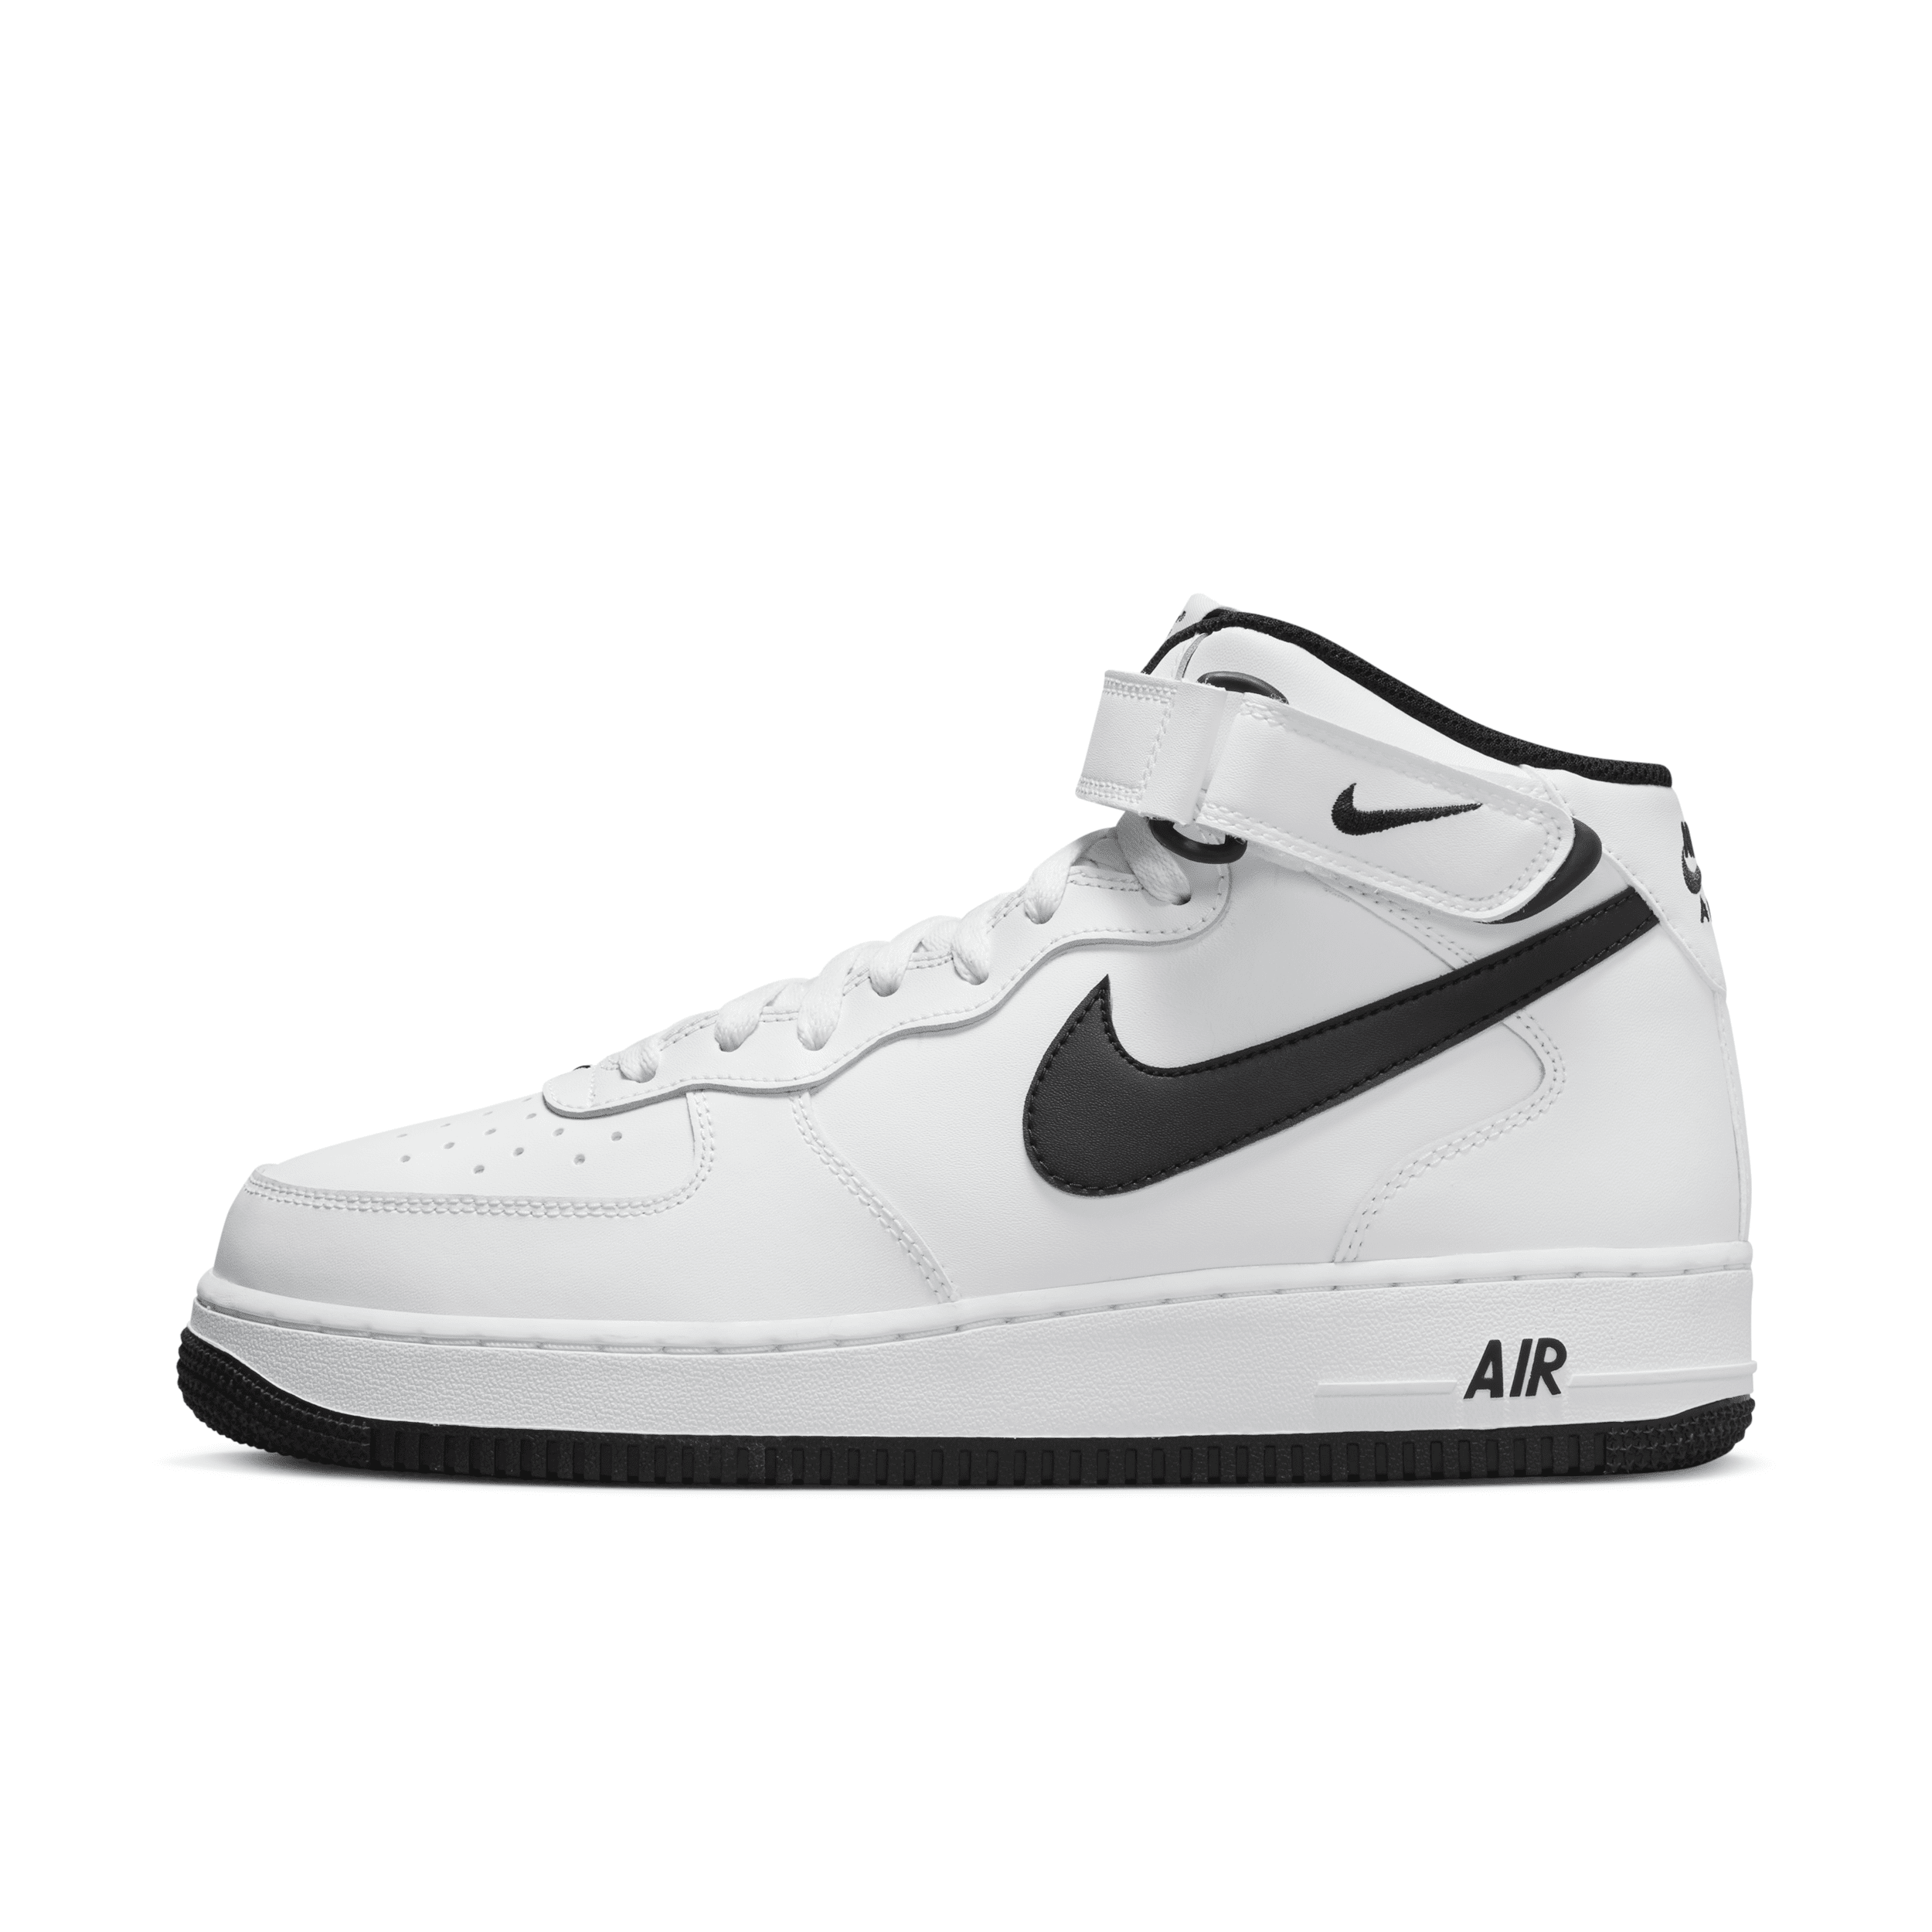 NIKE MEN'S AIR FORCE 1 MID '07 SHOES,1010060431